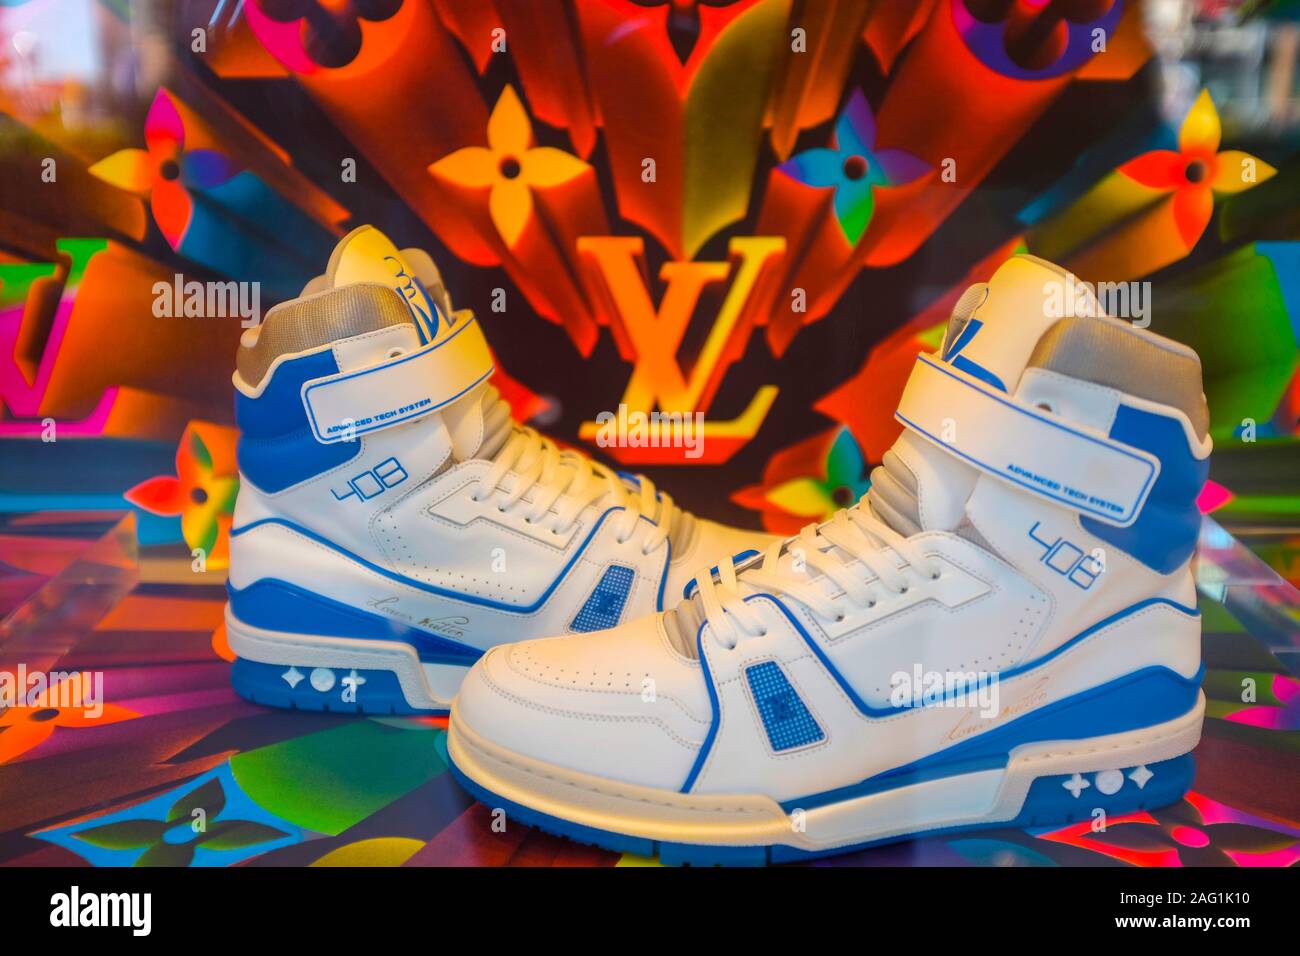 Fashion shoes on sale at Vuitton outlet at the Crystals at City Center Las Vegas Nevada USA Stock Photo - Alamy